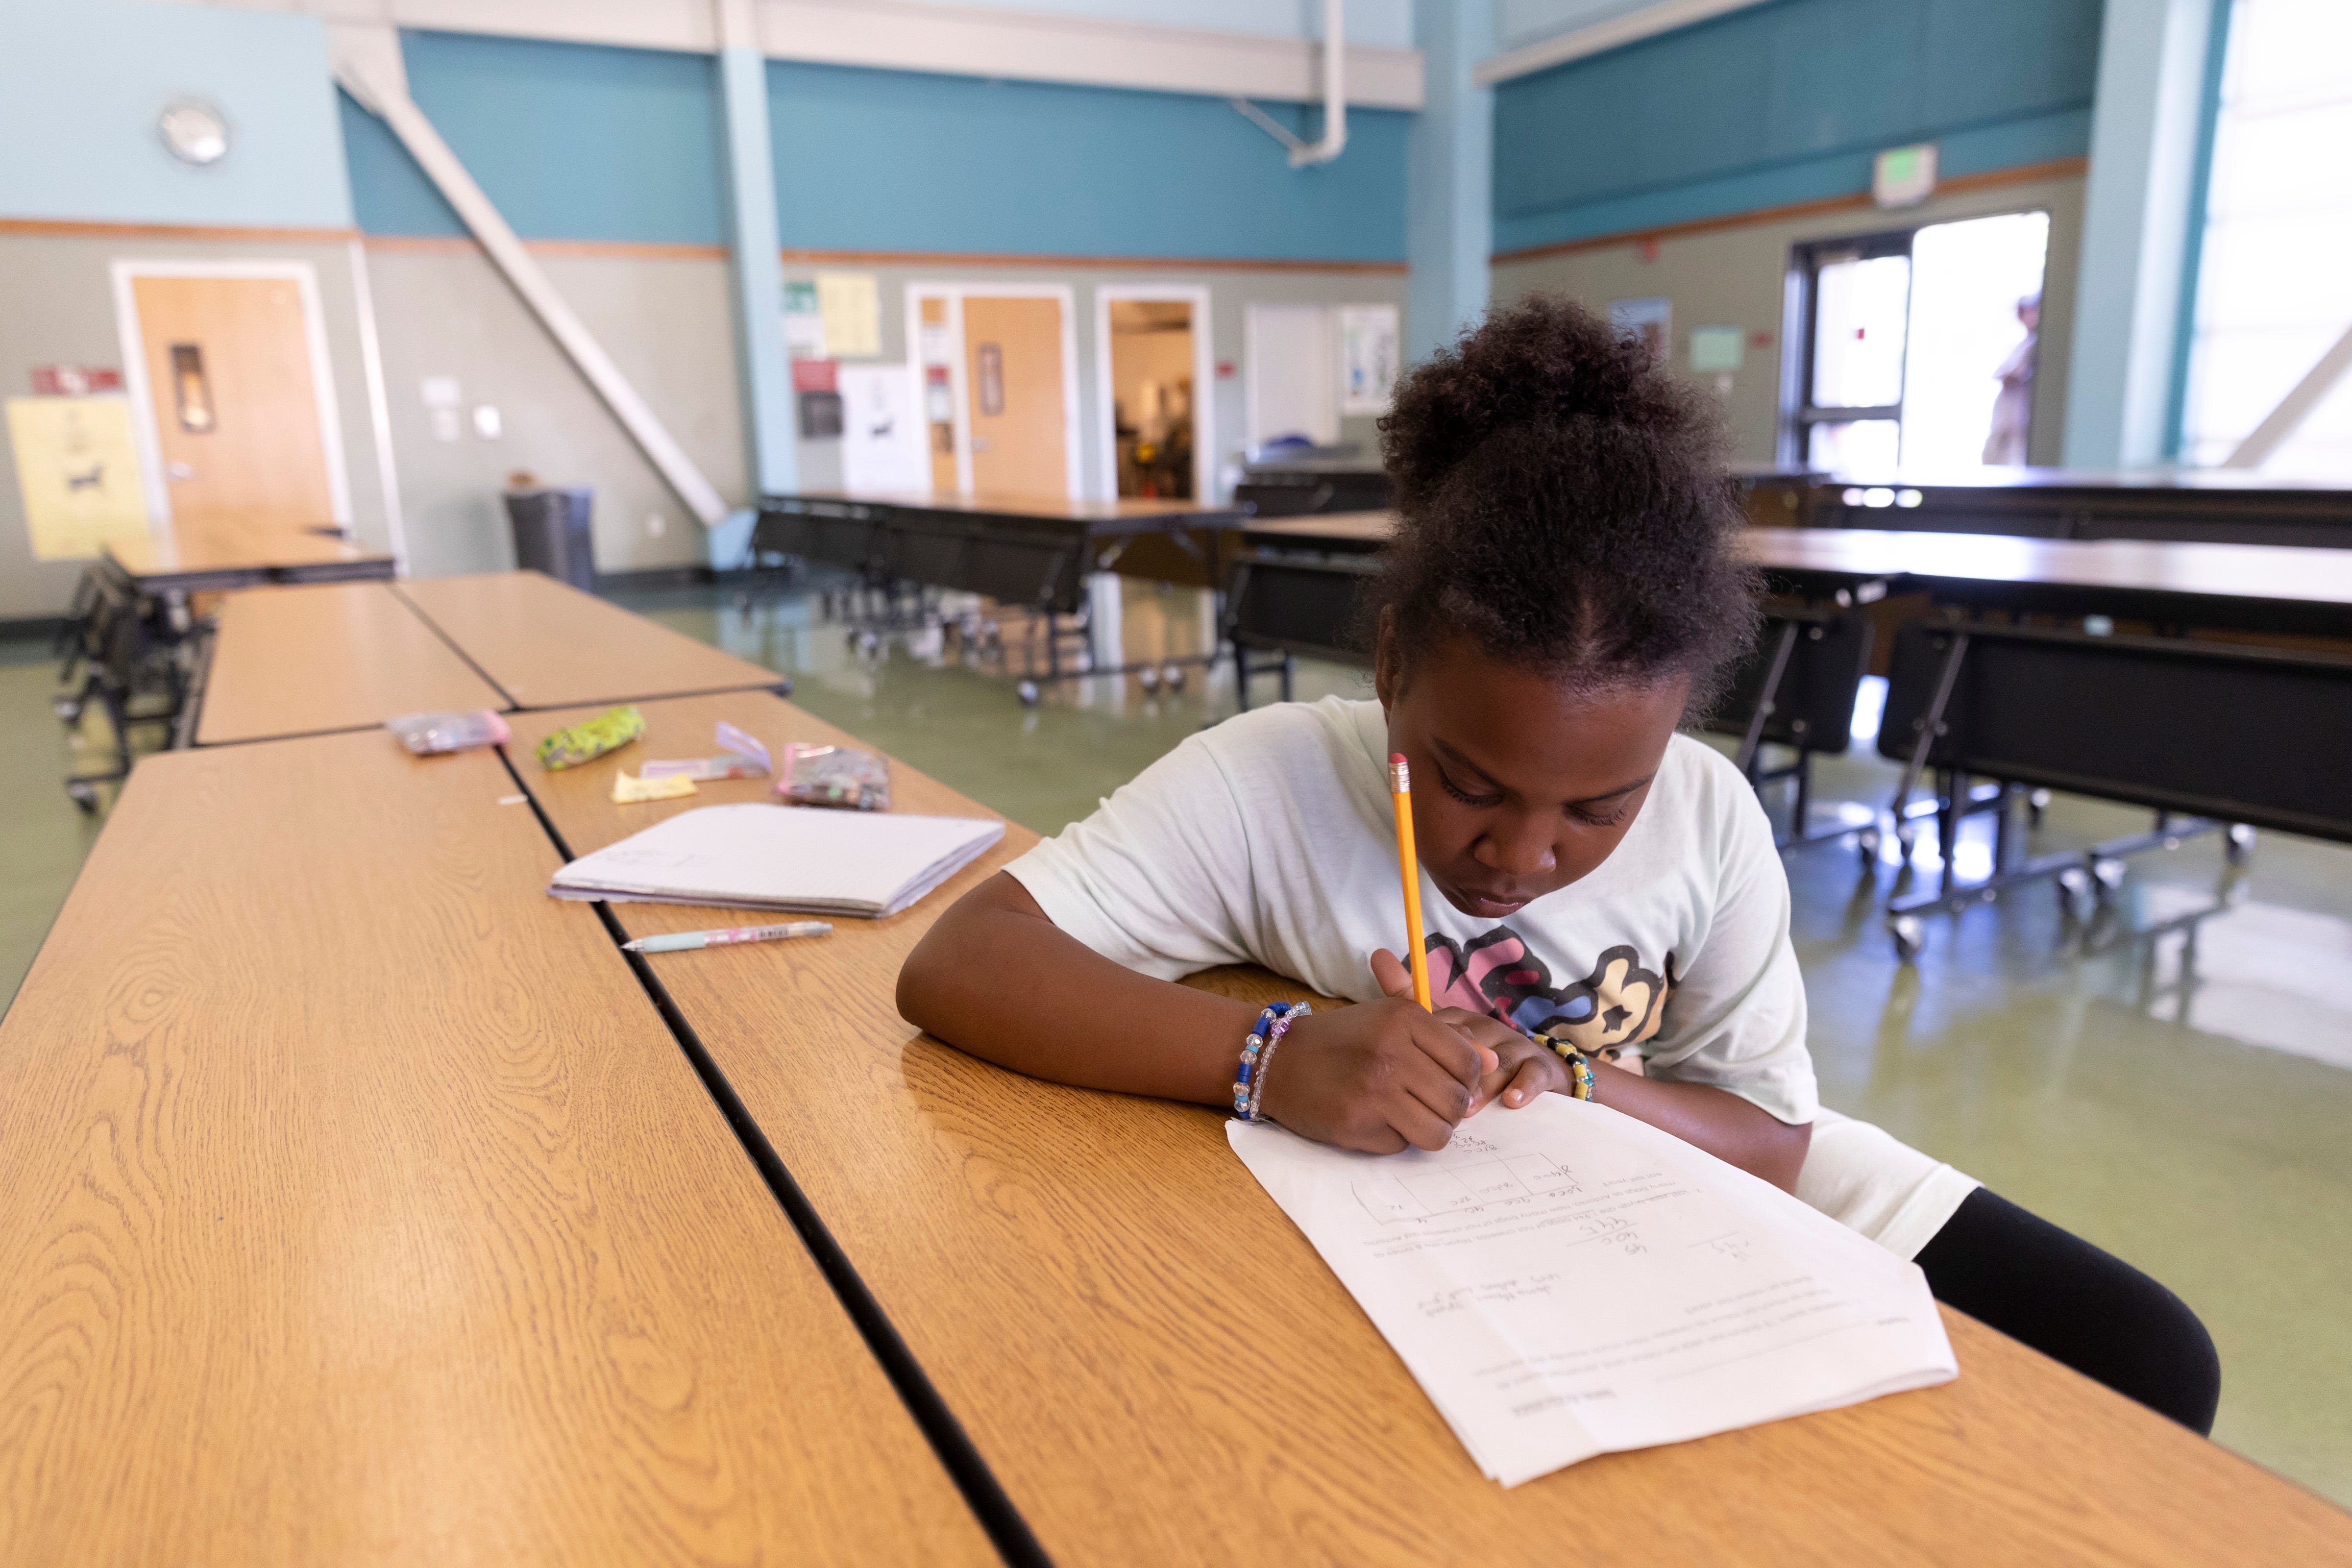 Jada Alexander works on her math homework in the cafeteria after school at Nystrom Elementary in Richmond, Calif.